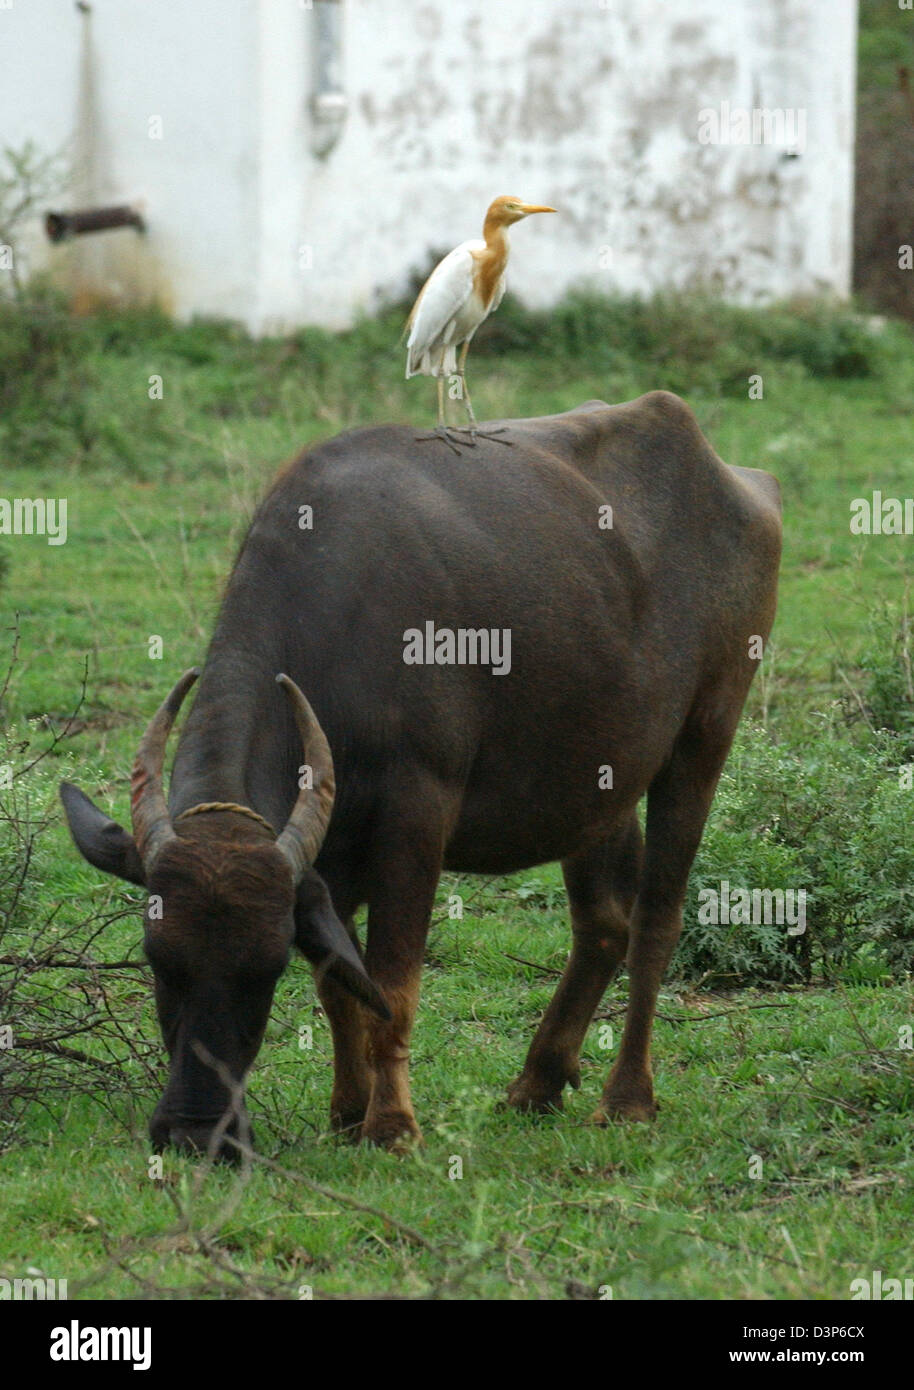 (dpa file) - The picture shows a  grazing water buffalo with a cattle egret on his back in a remote village near Chandrapur, India, 02 July 2006. Photo: Wolfgang Langenstrassen Stock Photo